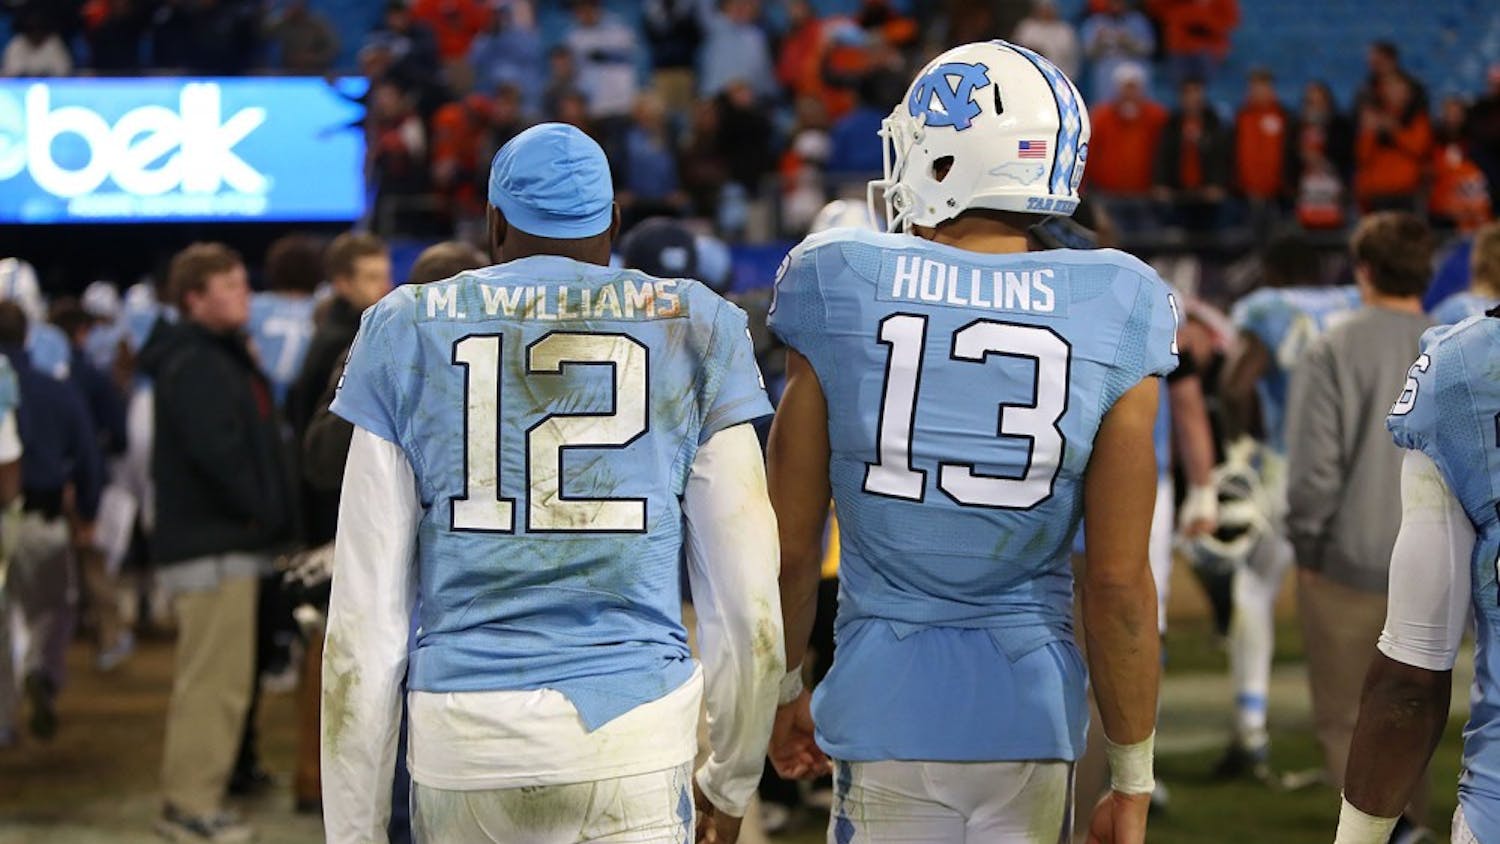 Marquise Williams (12) and Mack Hollins (13) walk back to the Carolina locker room at the conclusion of the game.&nbsp;